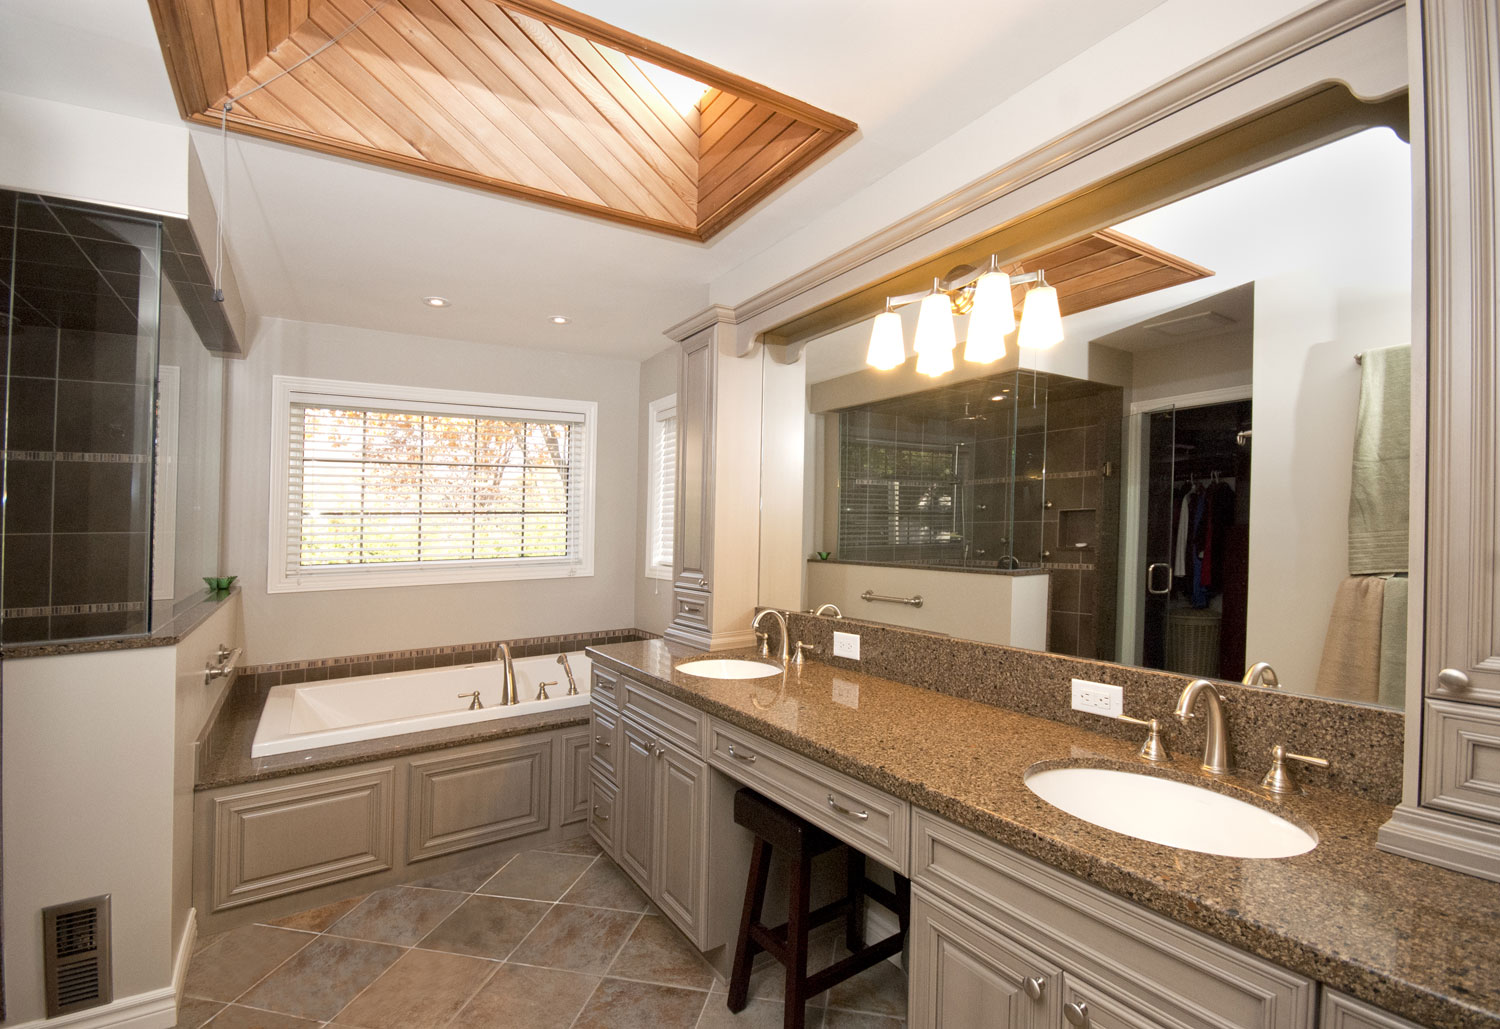 Large traditional ensuite design and renovation with dual sinks, makeup desk, large tub and separate walkin shower, skylight - Total Living Concepts barrie ontario